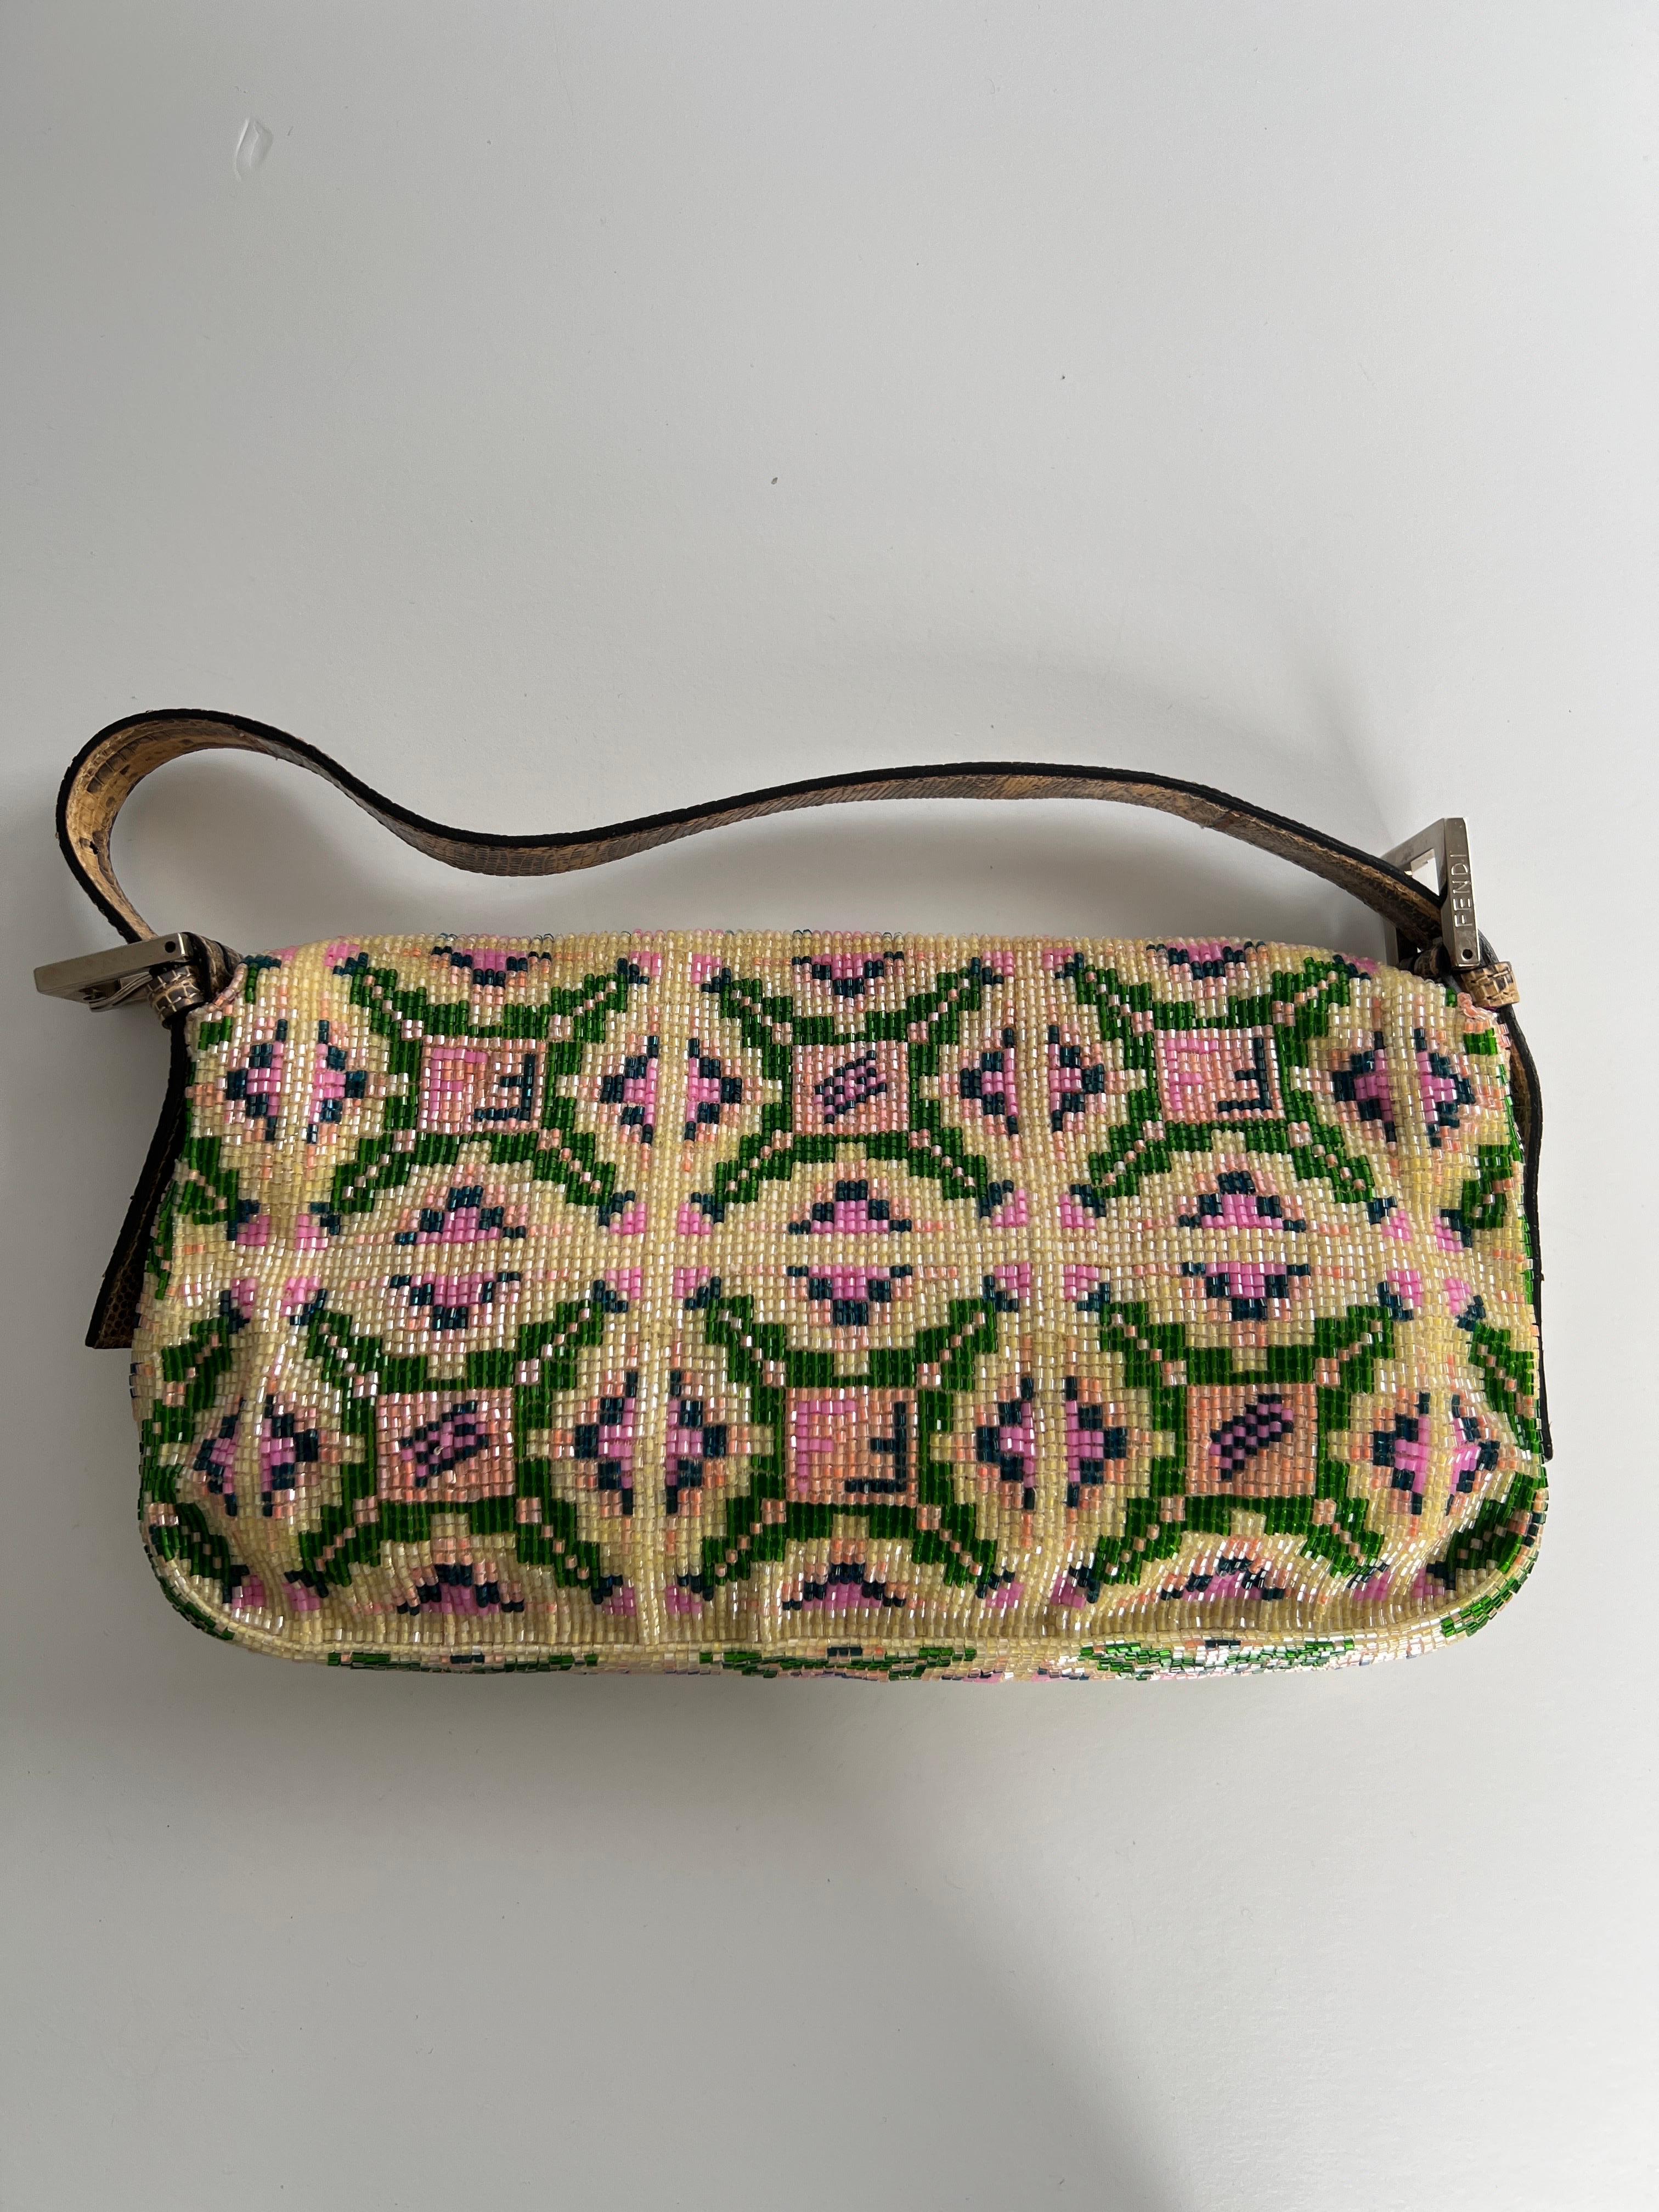 Fendi pink and green beaded baguette In Good Condition For Sale In Aurora, IL